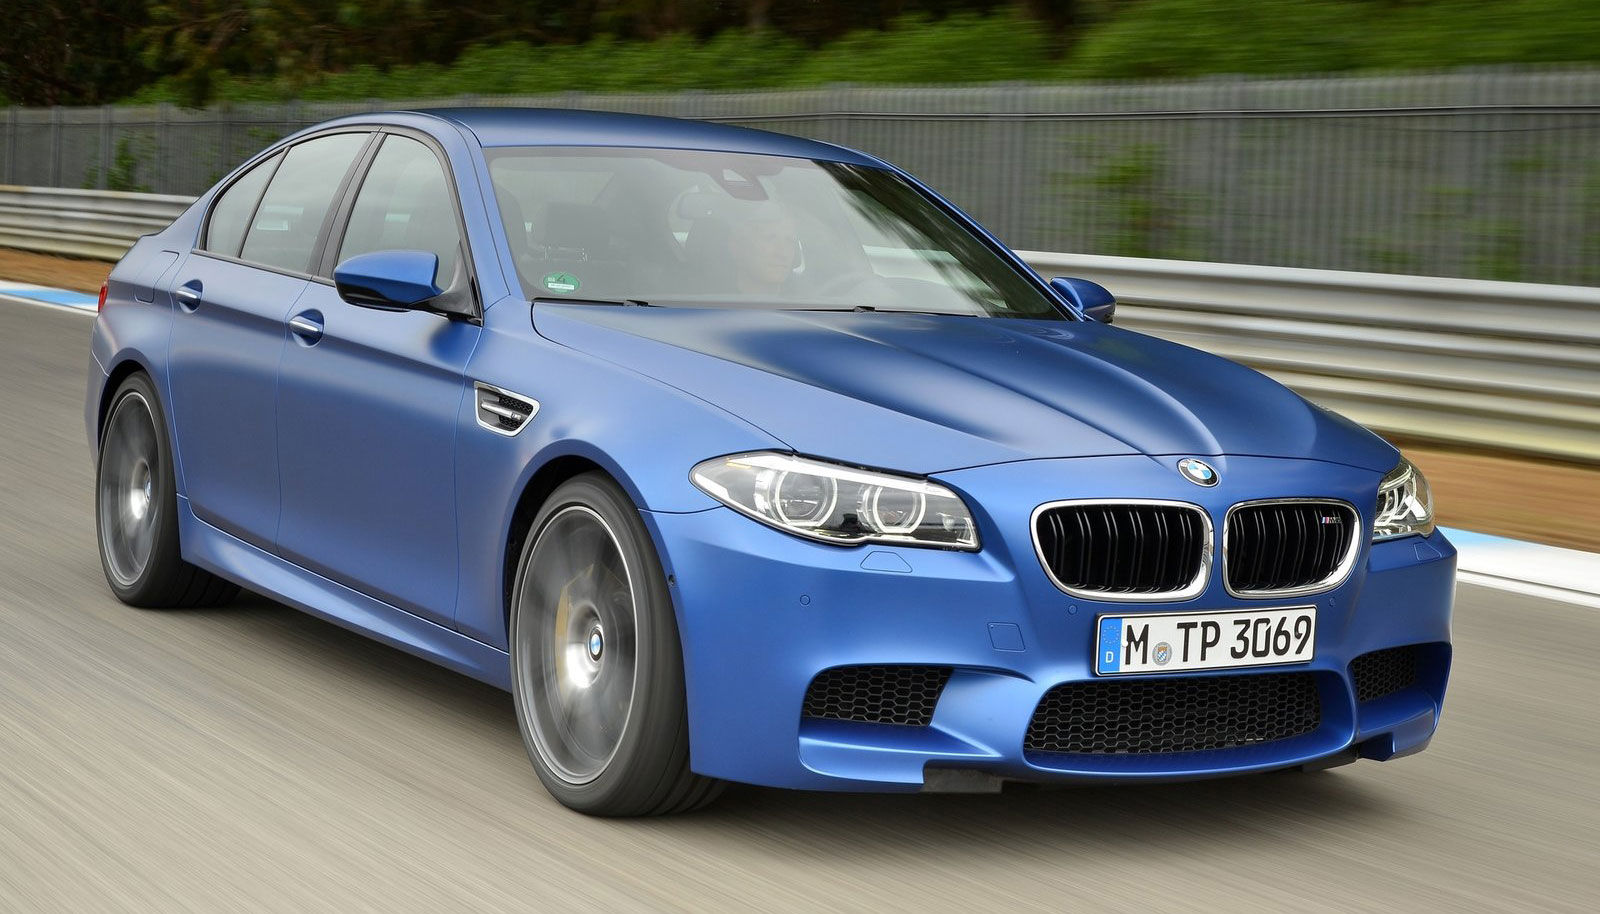 koper Familielid Ritueel Facelifted F10 BMW M5 now in Malaysia, from RM902k - paultan.org